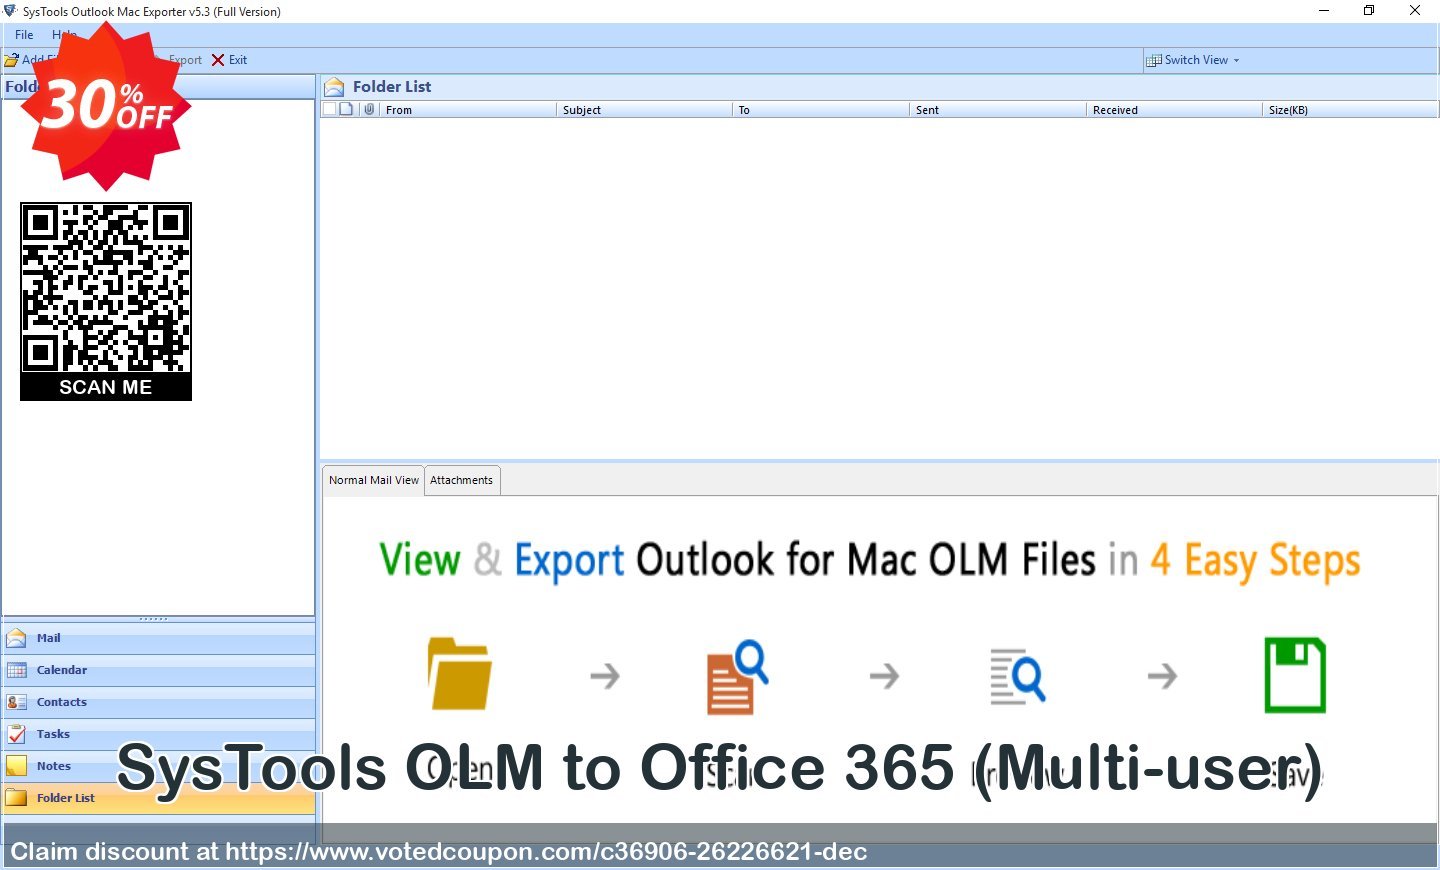 SysTools OLM to Office 365, Multi-user  Coupon Code Apr 2024, 30% OFF - VotedCoupon